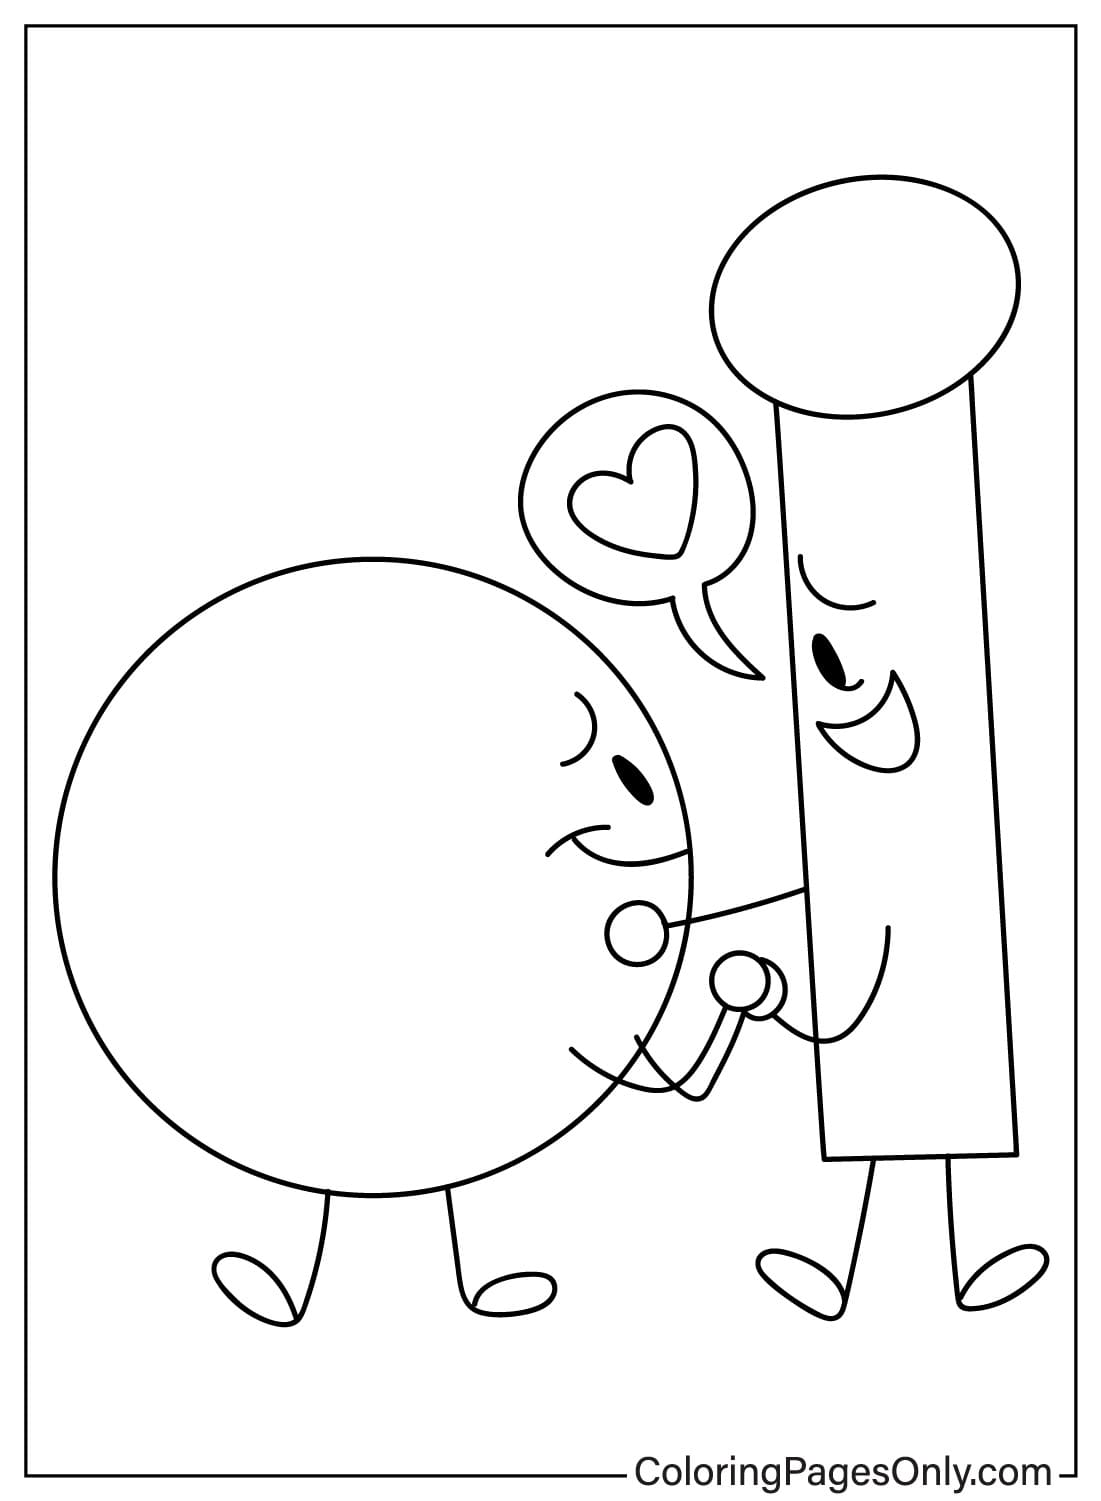 BFDI Coloring Page Free from Battle for Dream Island